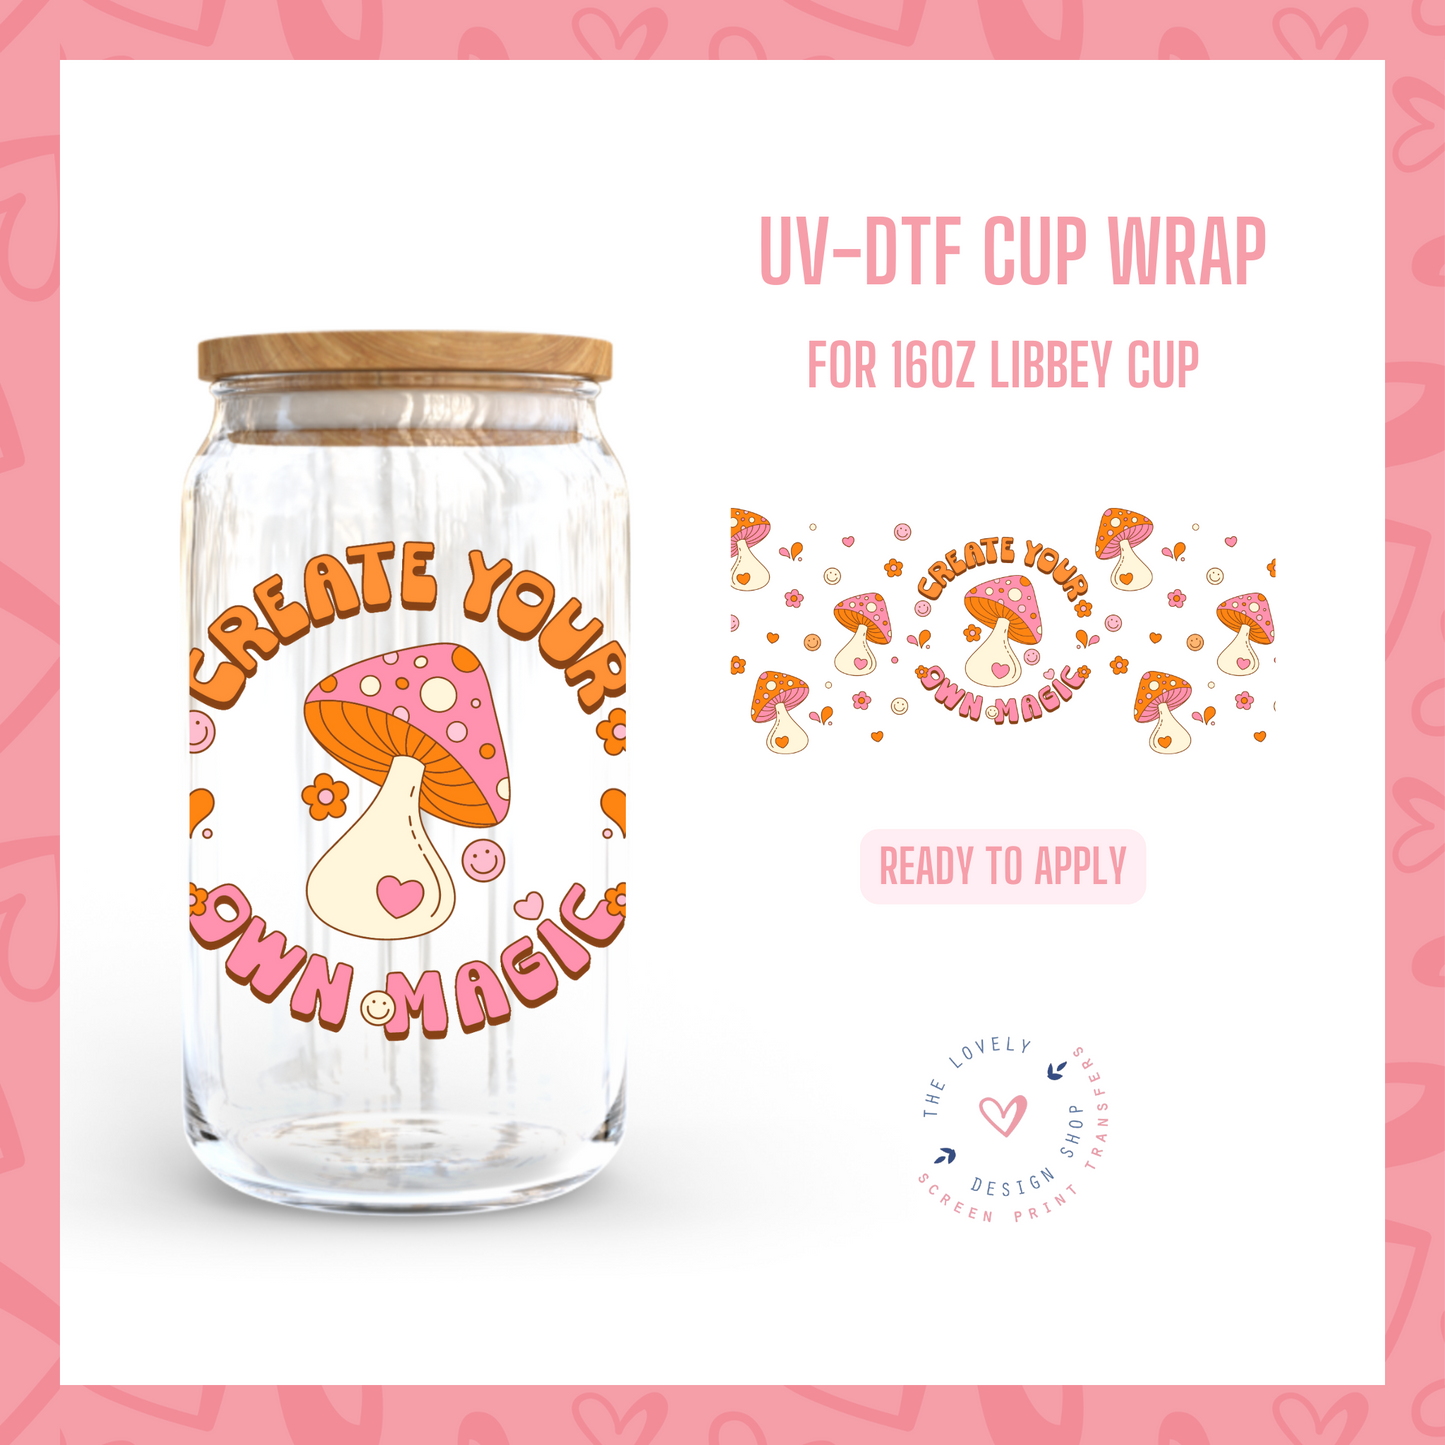 Create Your Own Magic - UV DTF 16 oz Libbey Cup Wrap (Ready to Ship) Mar 11